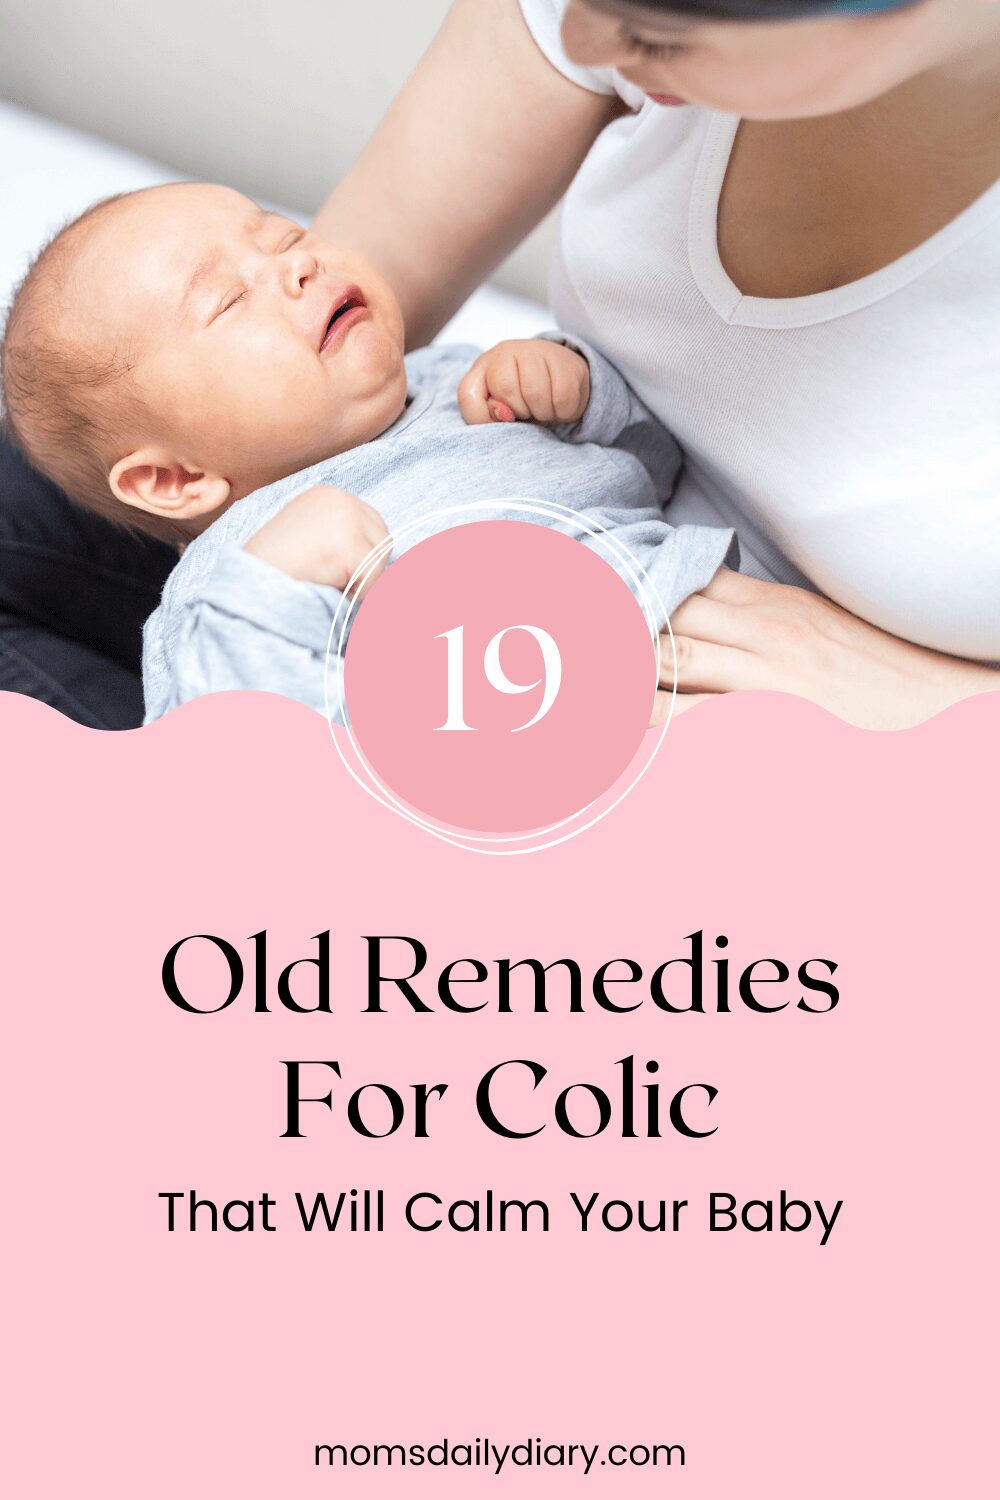 Colic can be a nightmare, especially since there's no cure. But there are old remedies for colic that can make this period a lot easier.